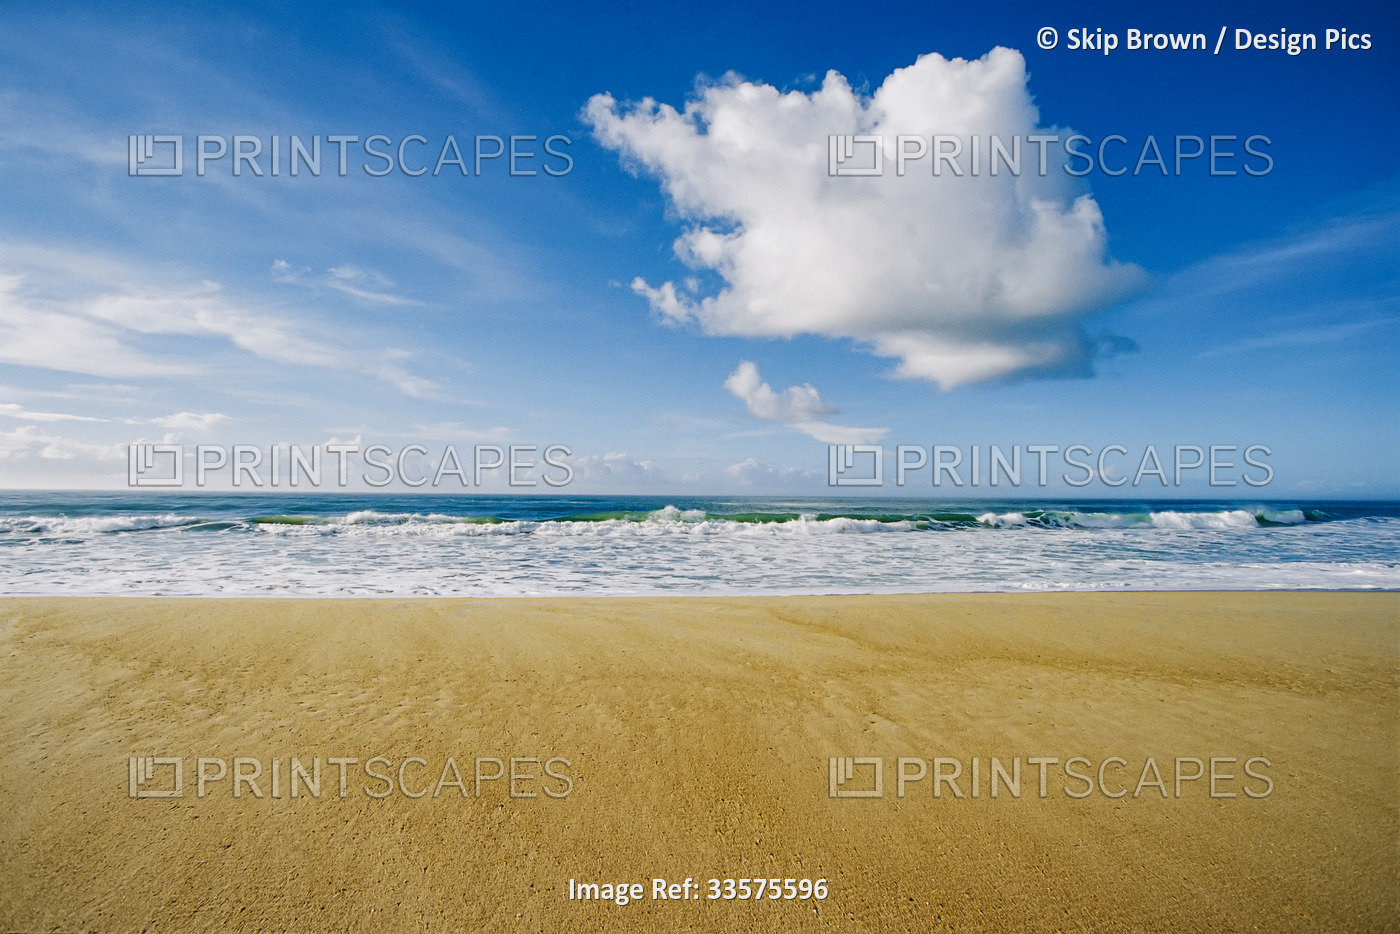 View of sun, sand, and surf at Cape Hatteras, North Carolina.; Cape Hatteras ...